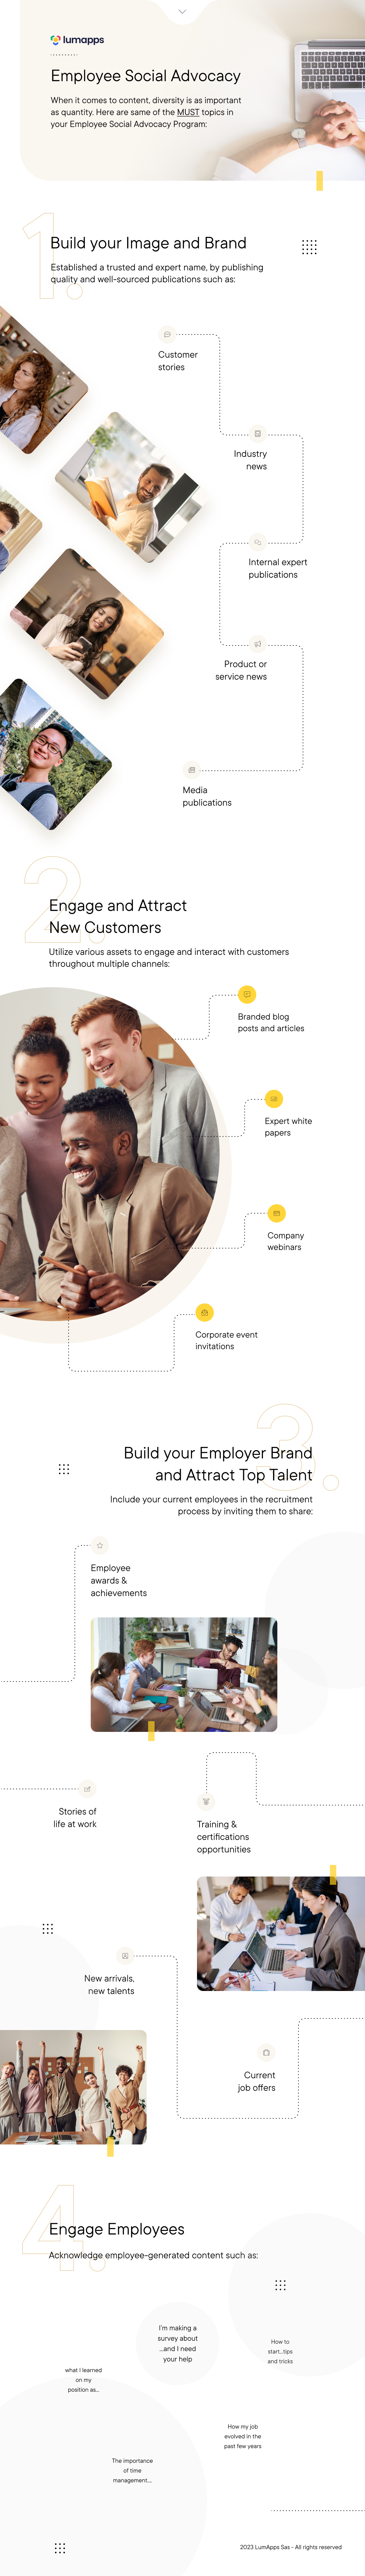 Employee Social Advocacy Content Examples - Infographic